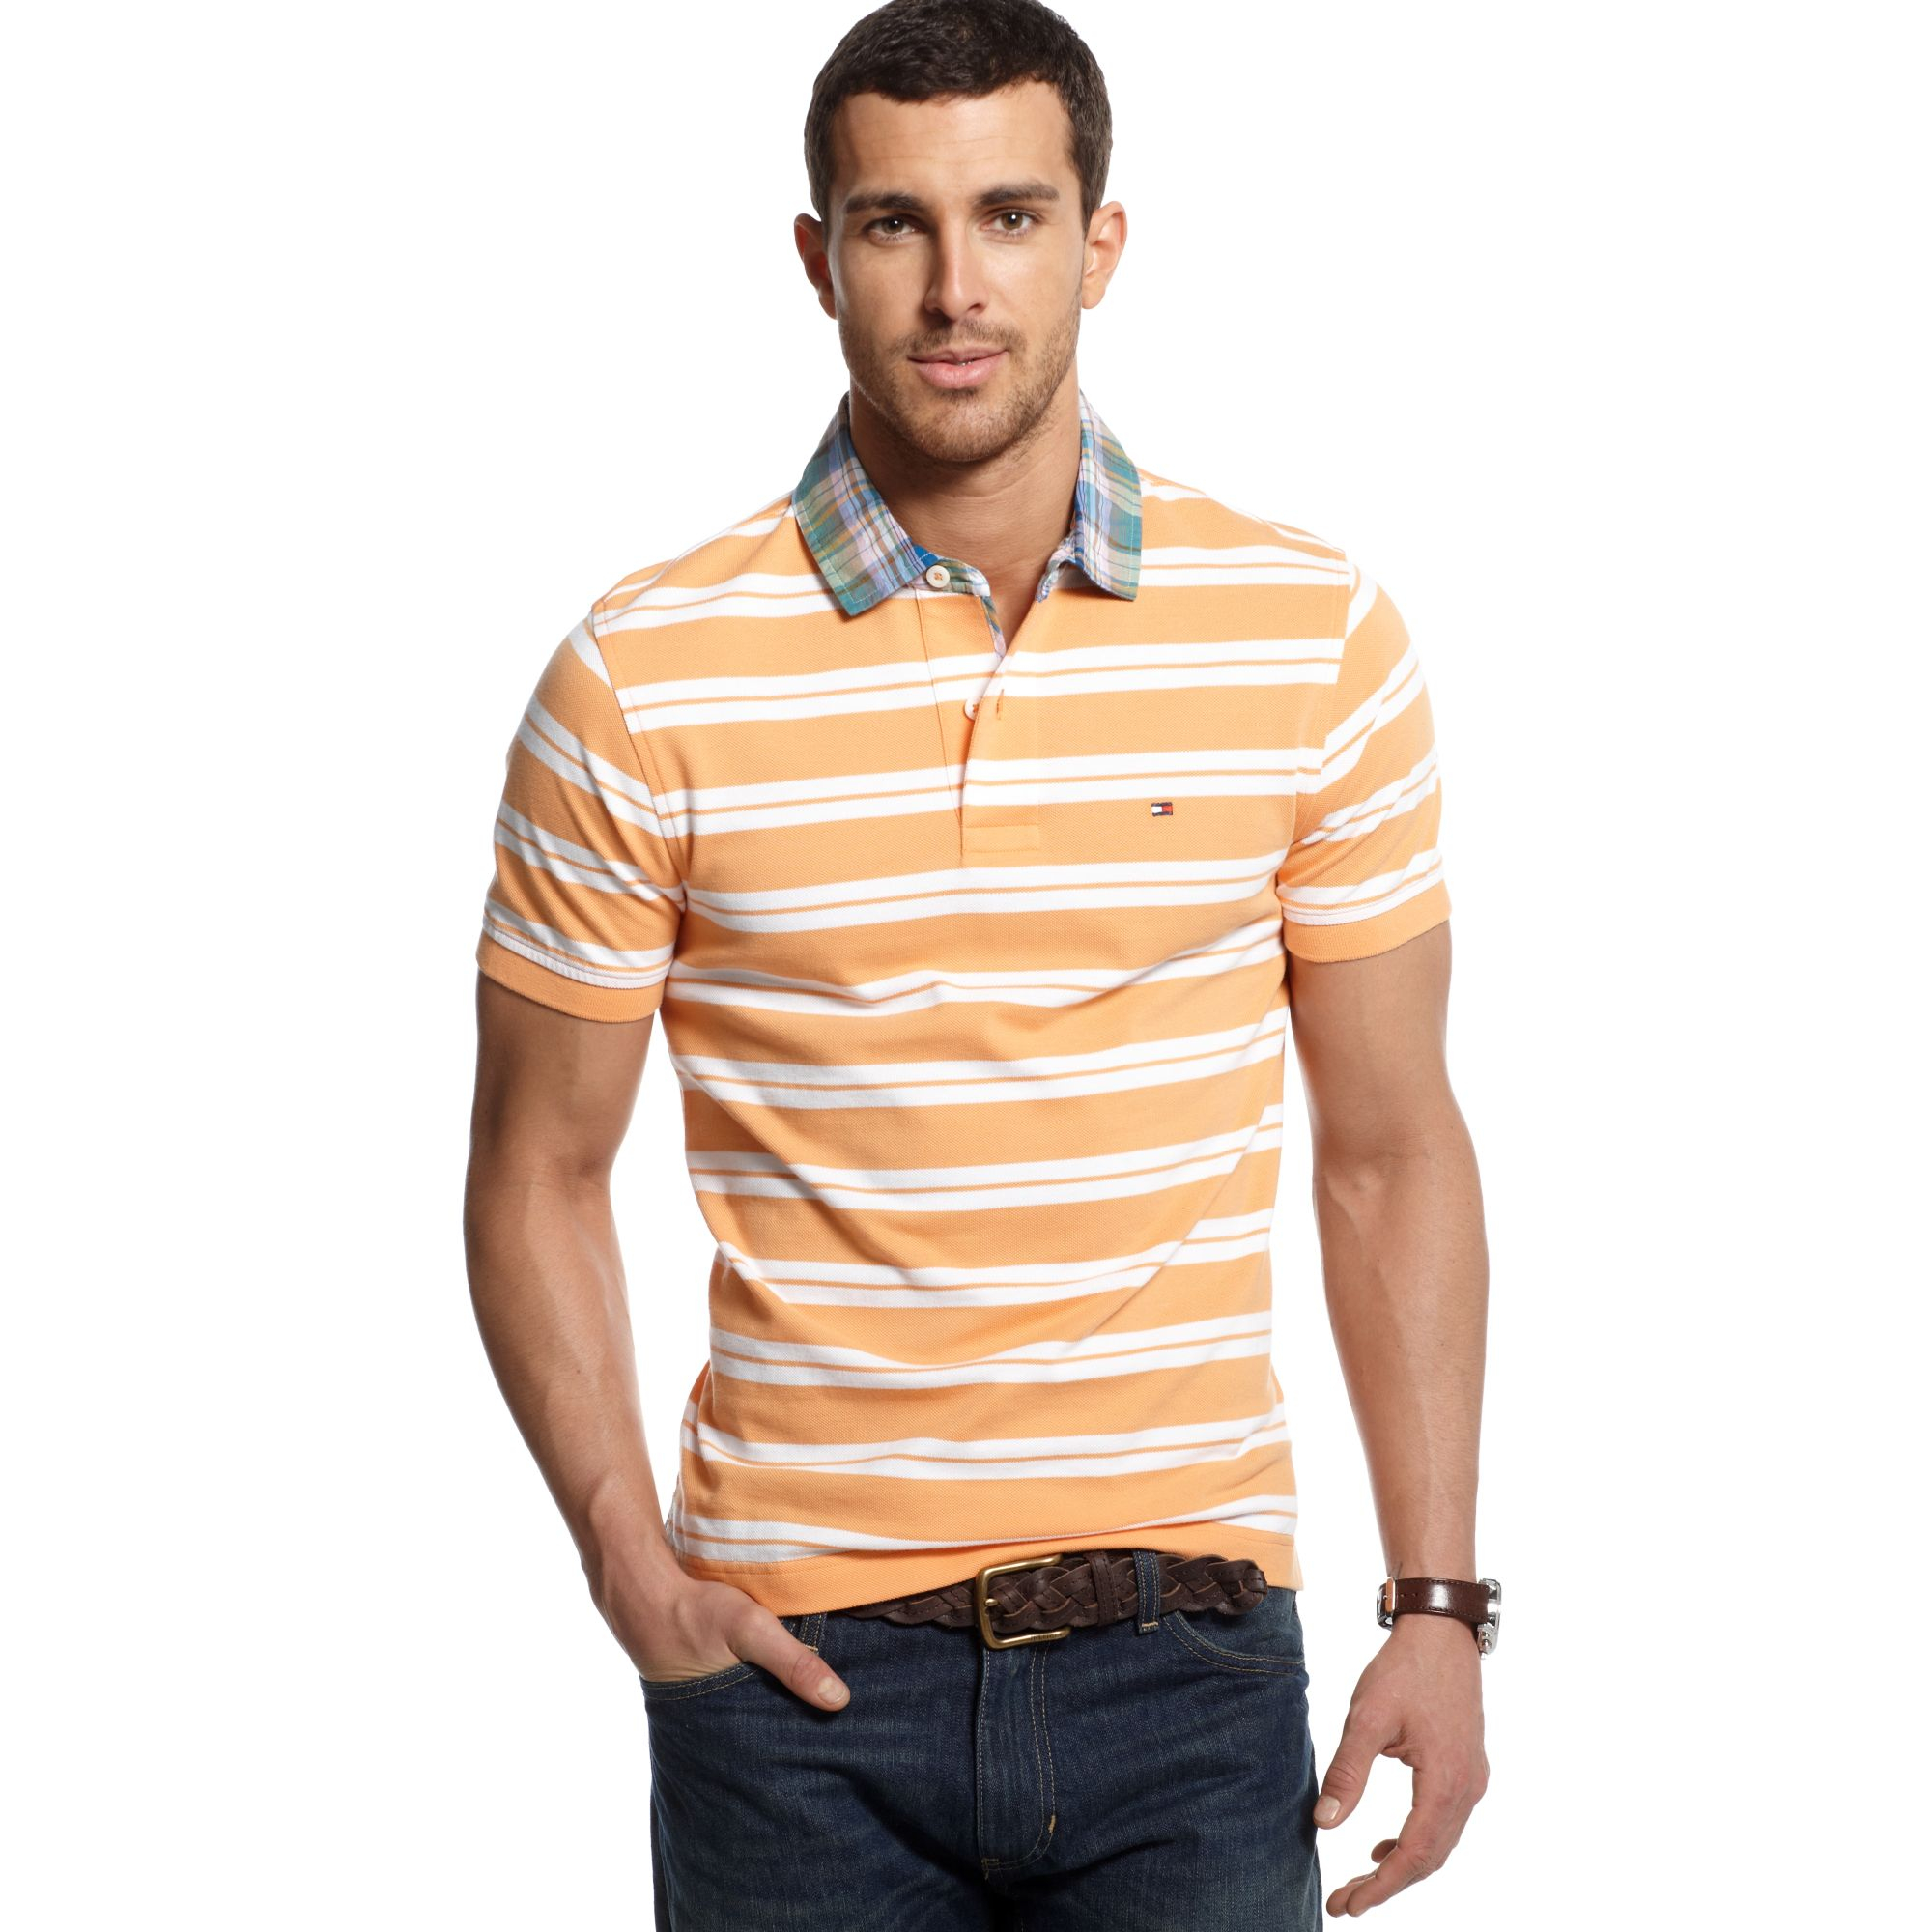 Lyst - Tommy hilfiger Contrast Collar Polo Shirt in Orange for Men